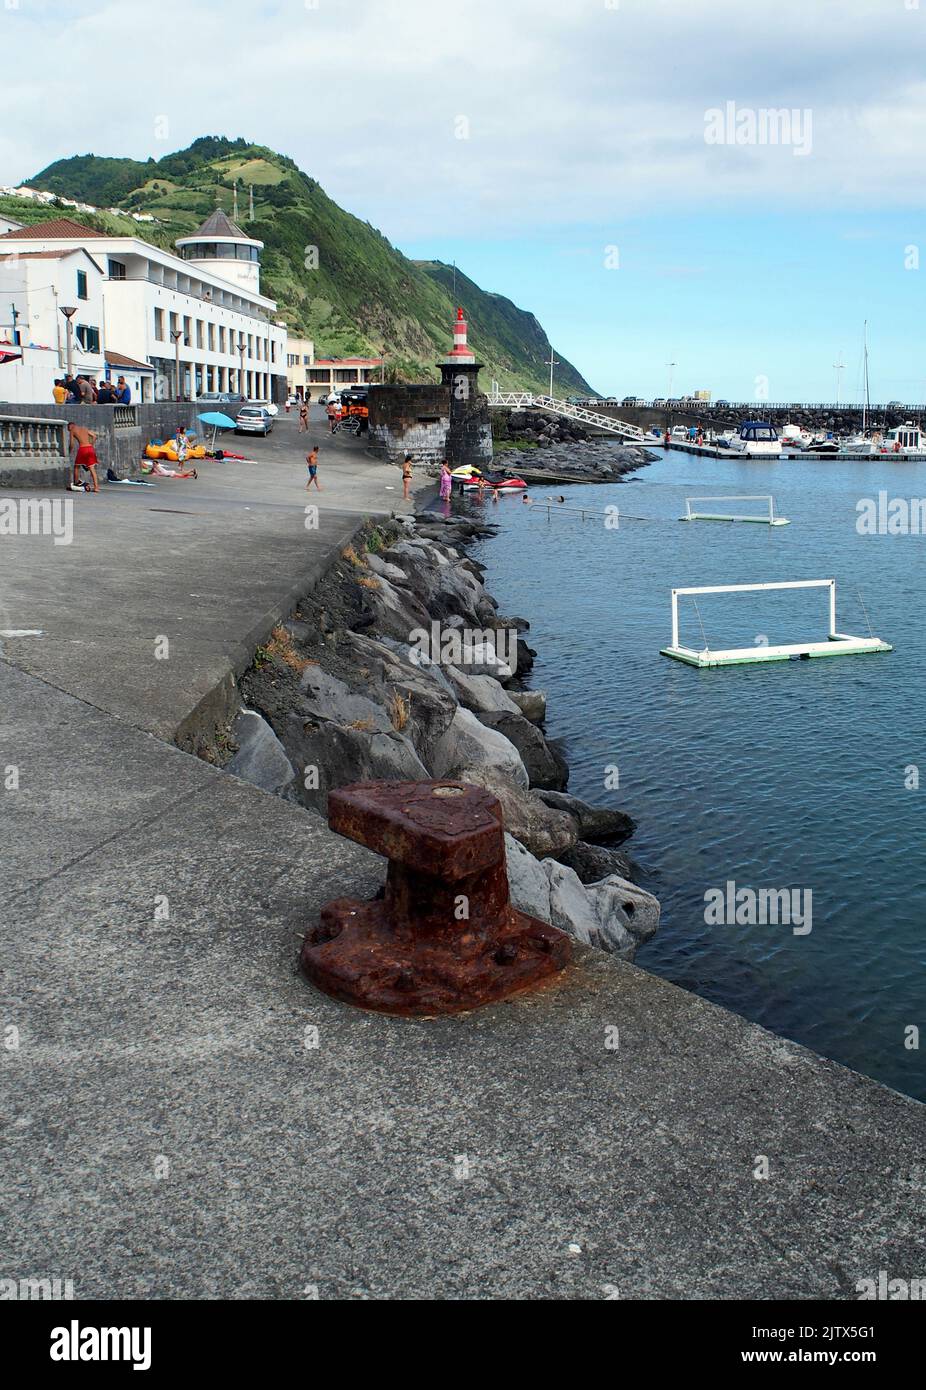 The town's stoneclad waterfront and marina, Povoacao, Sao Miguel Island, Azores, Portugal Stock Photo